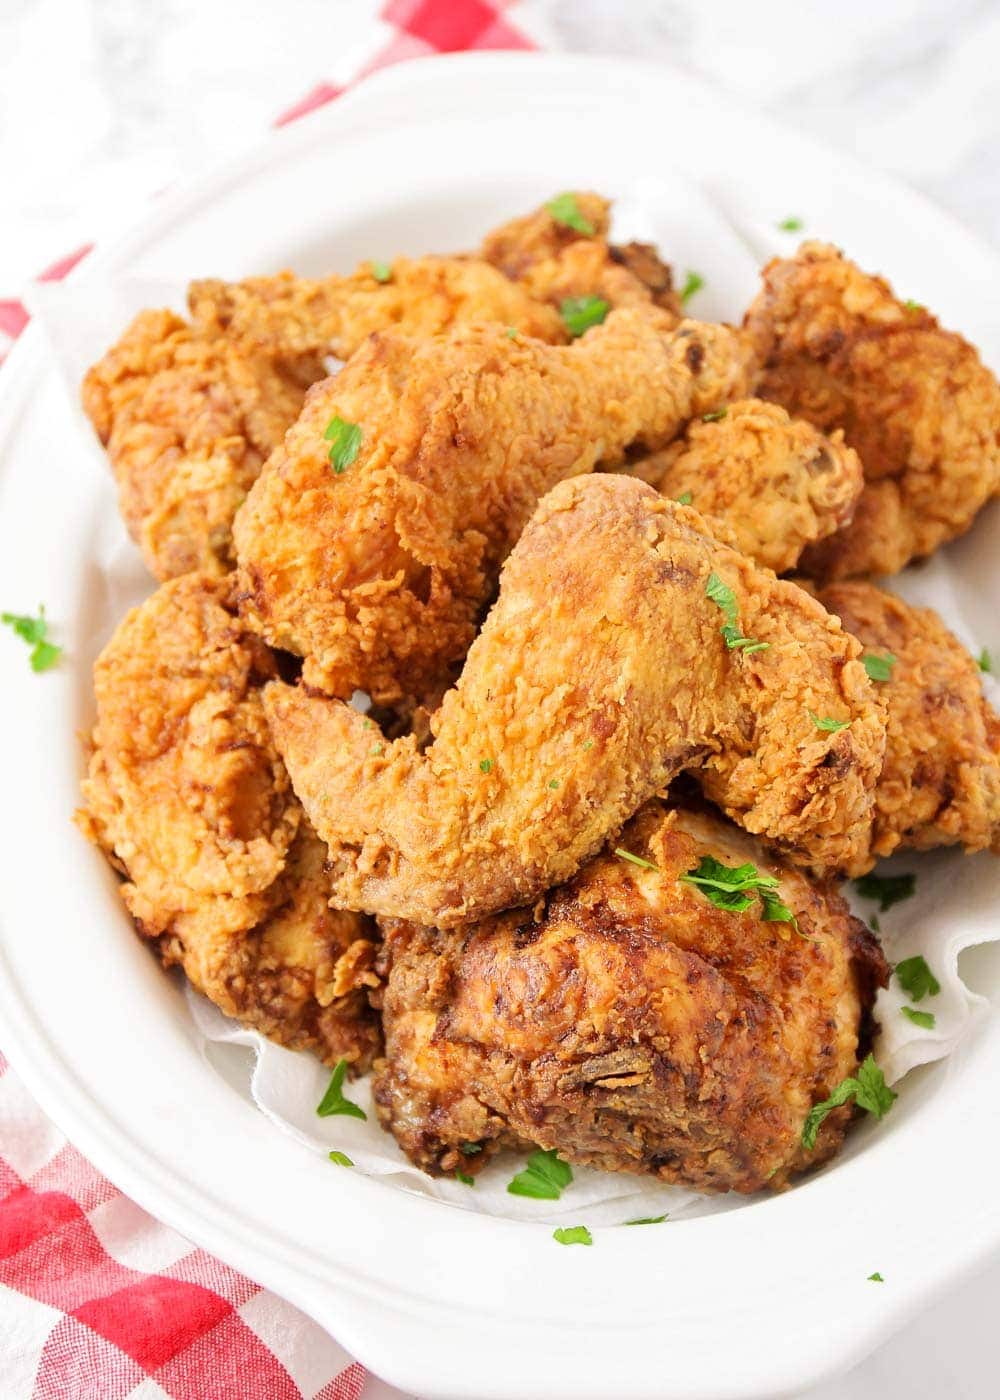 Buttermilk Fried Chicken Recipe Video Lil Luna,What Is Fondant Made Out Of